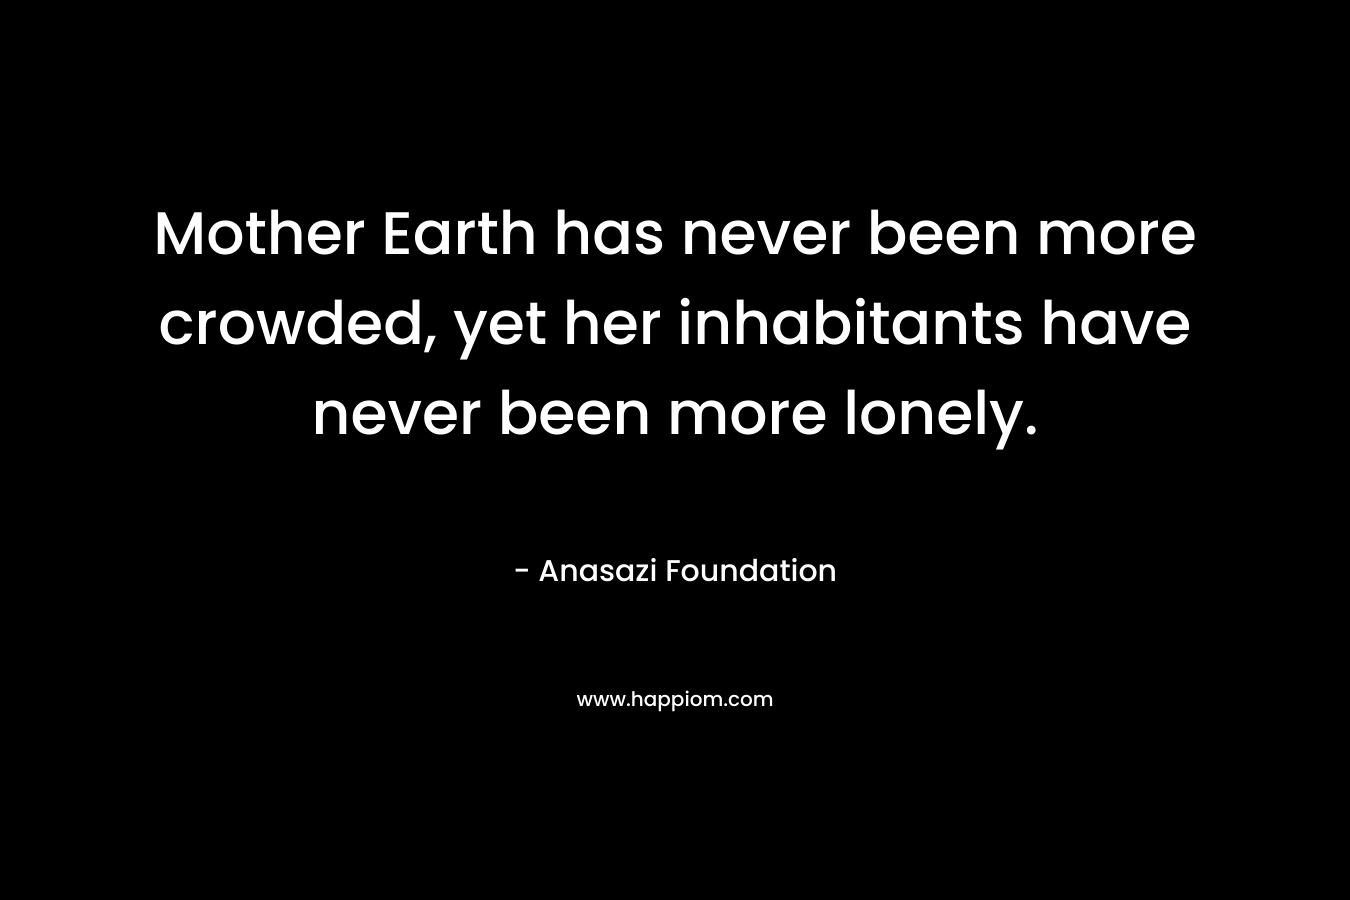 Mother Earth has never been more crowded, yet her inhabitants have never been more lonely. – Anasazi Foundation